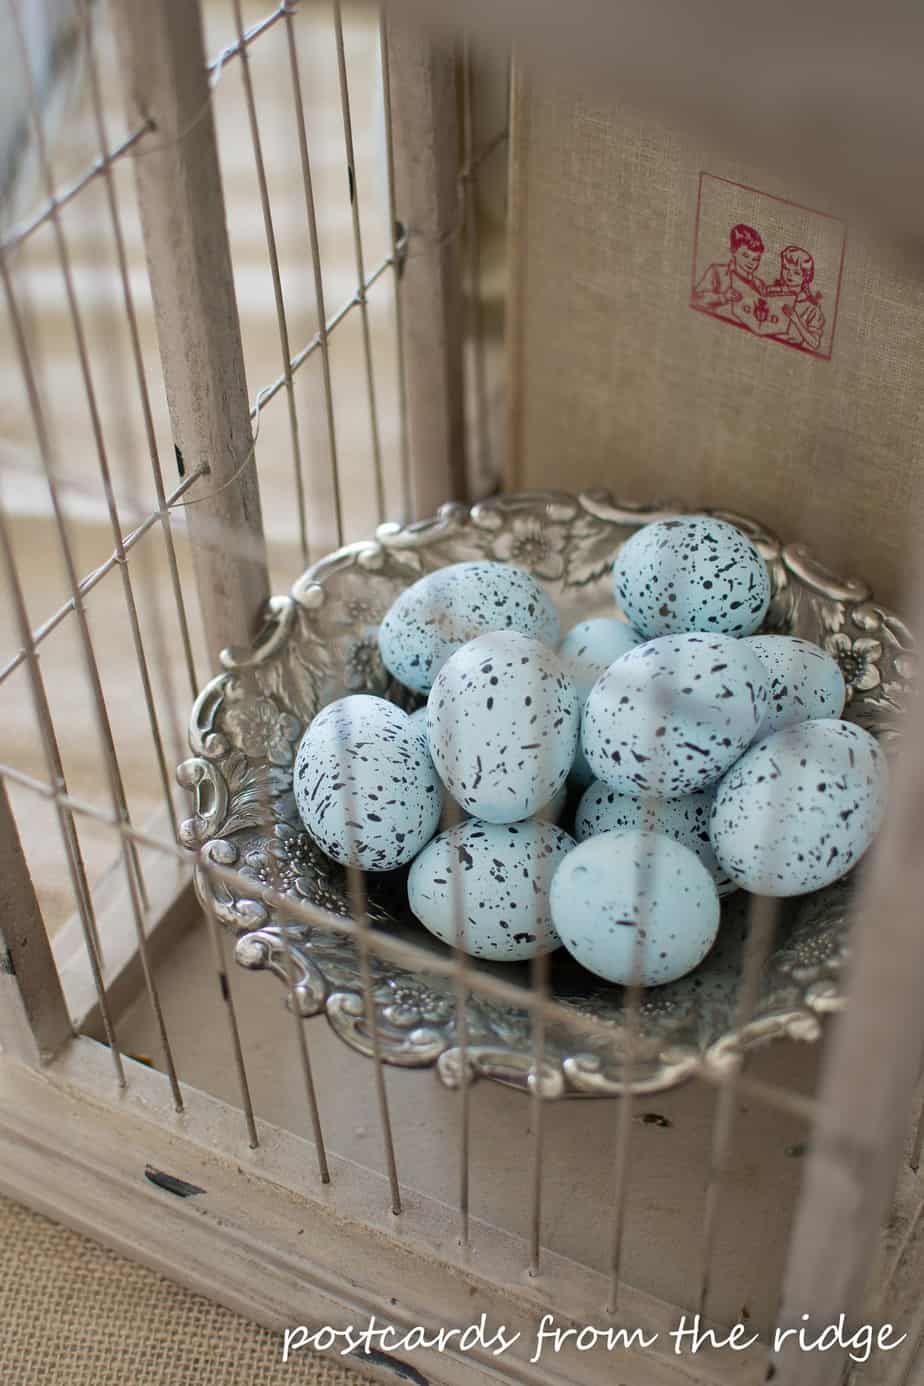 Blue Ceramic Robin Eggs in a Vintage Silver Bowl. Lots of pretty spring decor ideas here. Postcards from the Ridge.